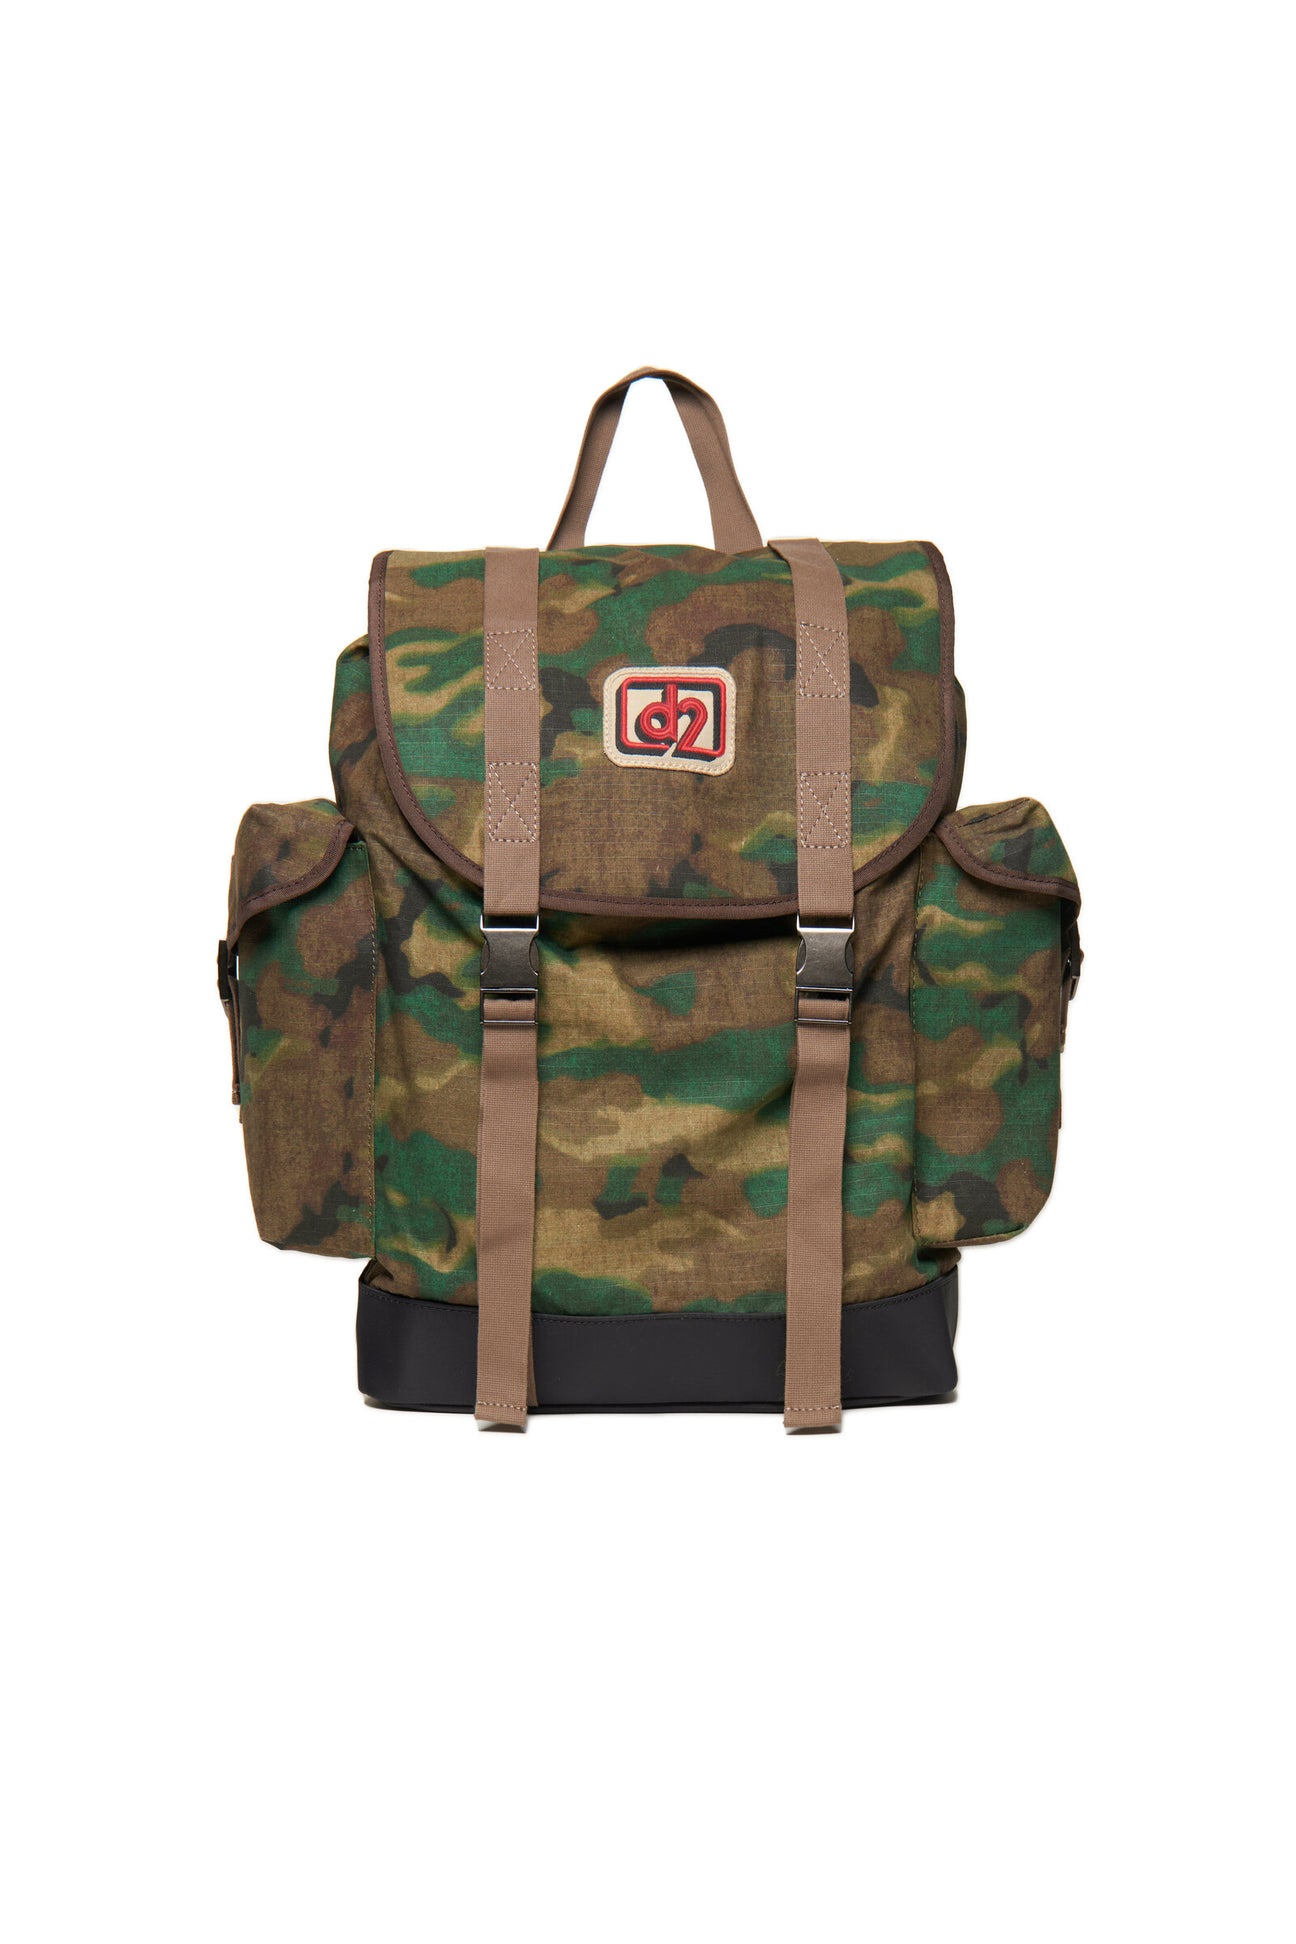 Camouflage allover military backpack with patches Camouflage allover military backpack with patches